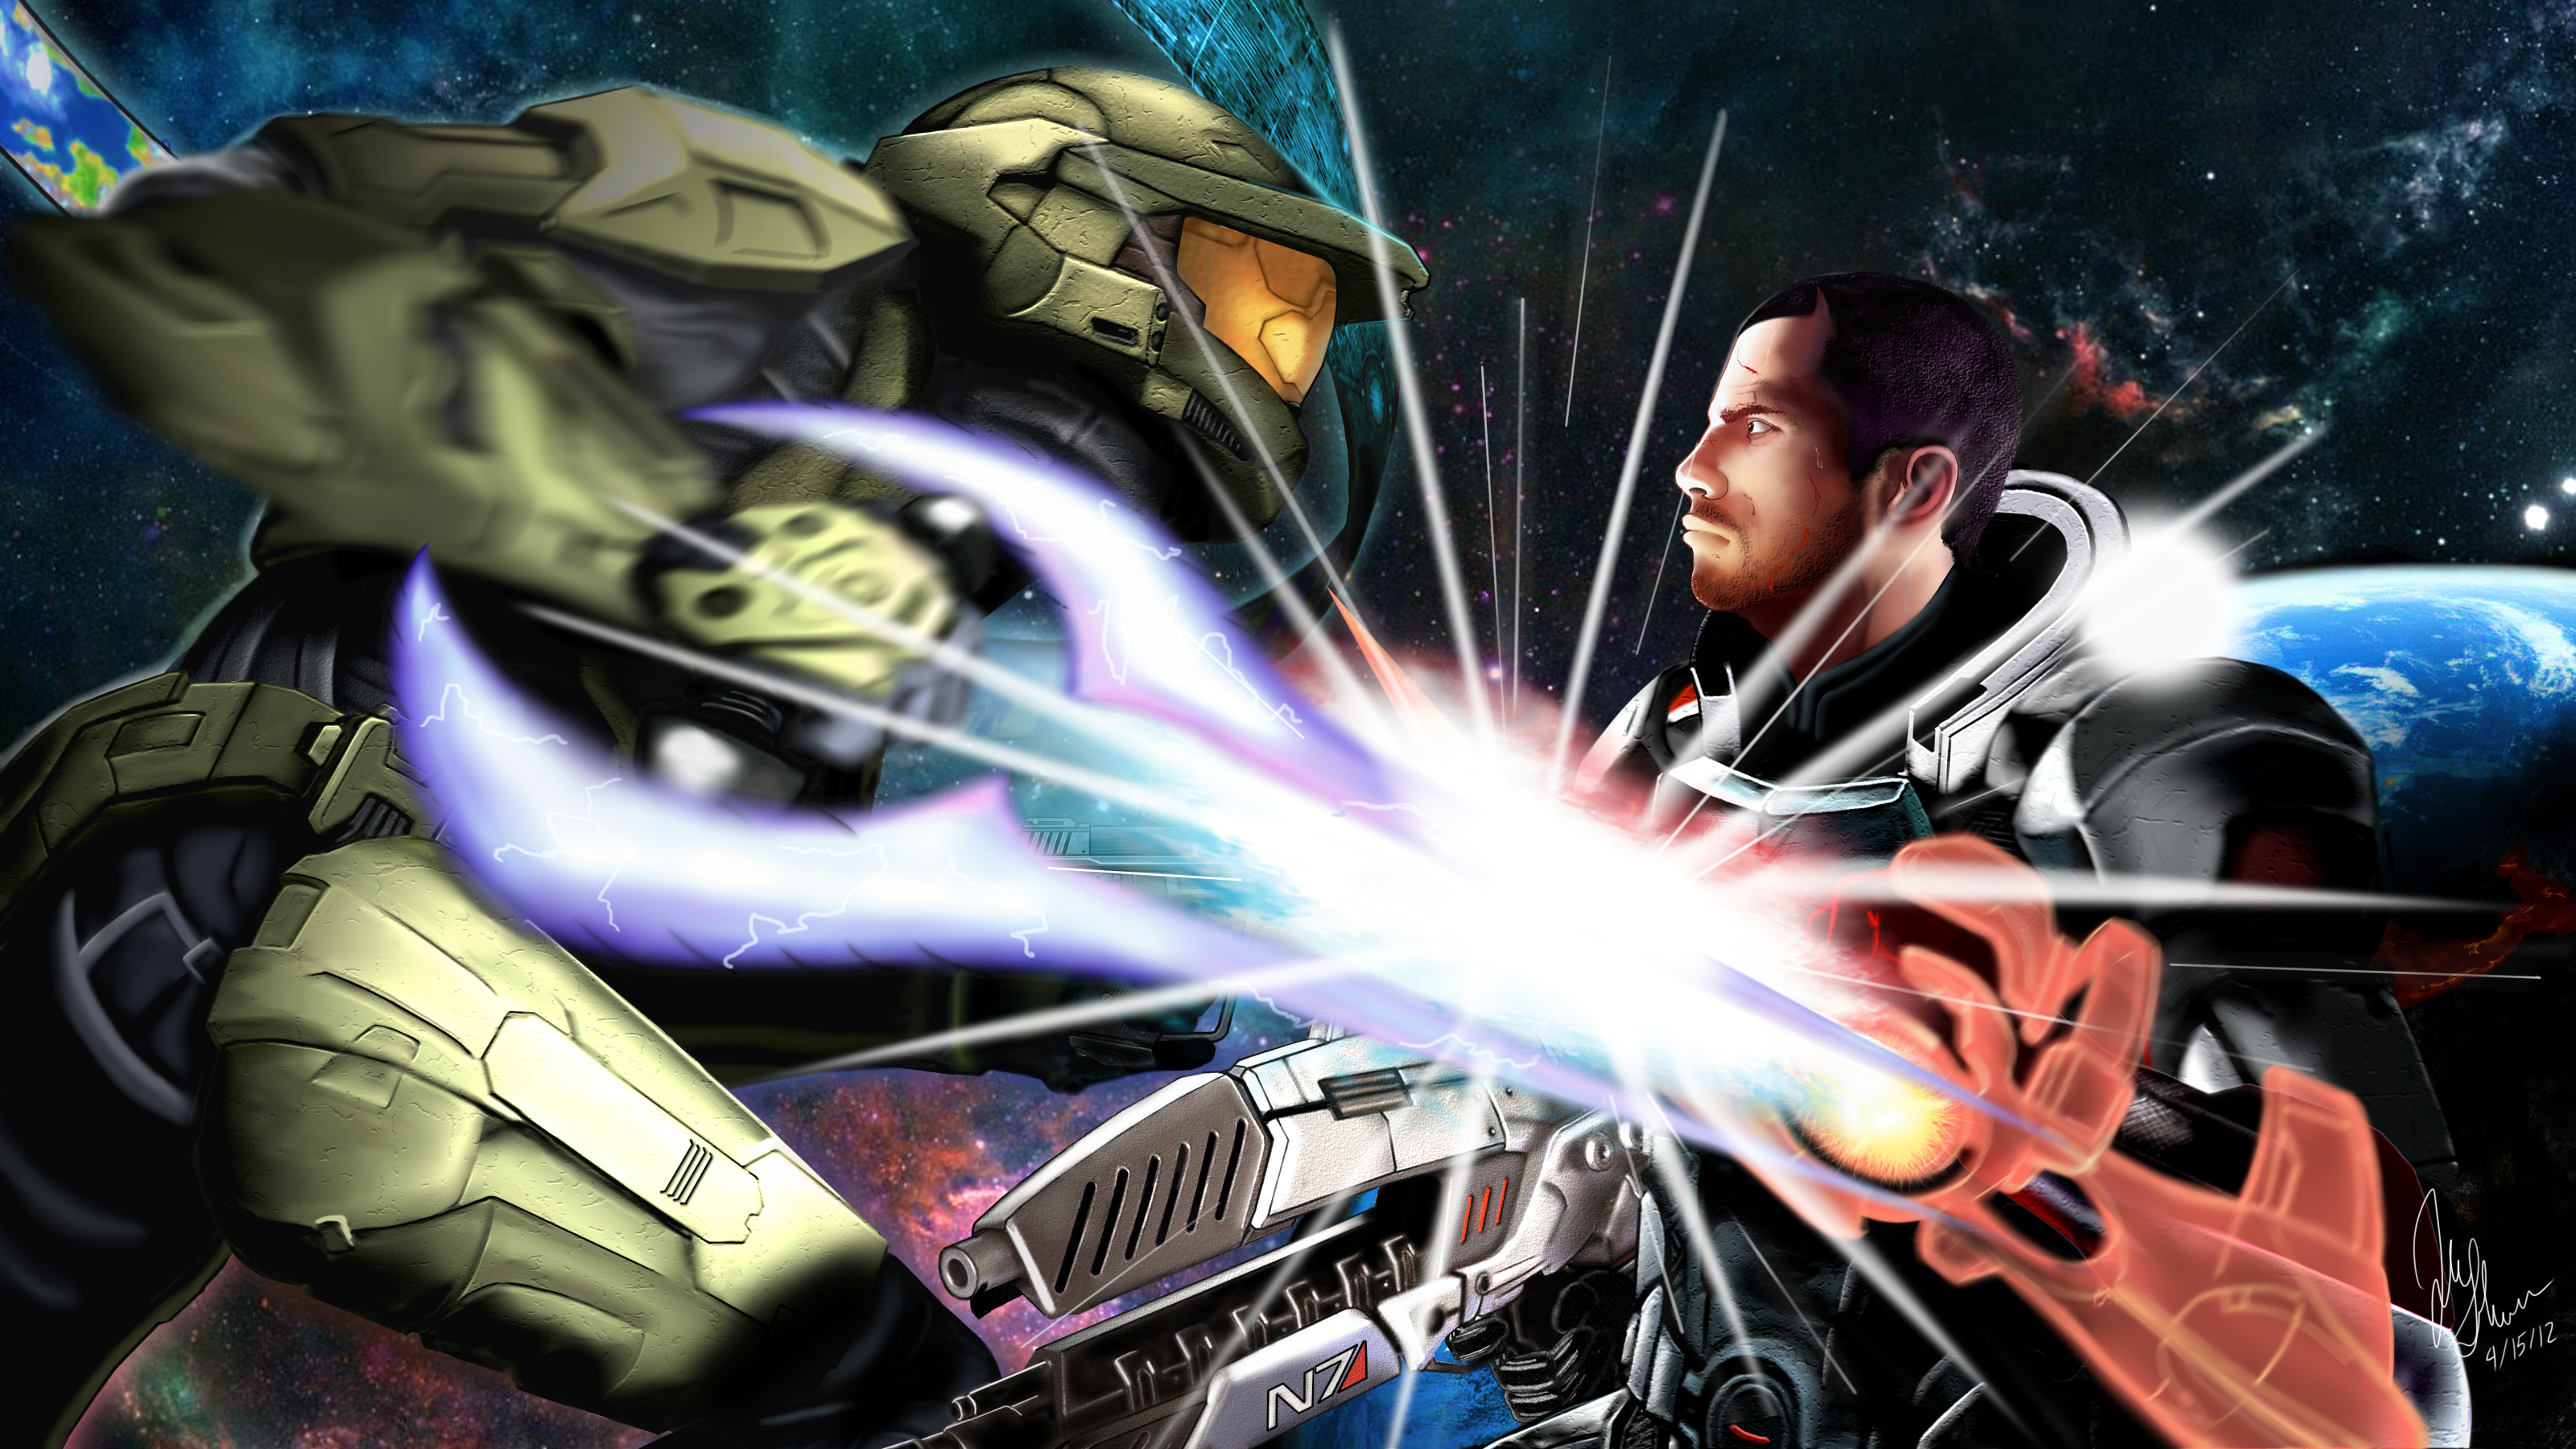 master_chief_vs_commander_shepard_by_some_bored_guy-d4w58s2.jpg